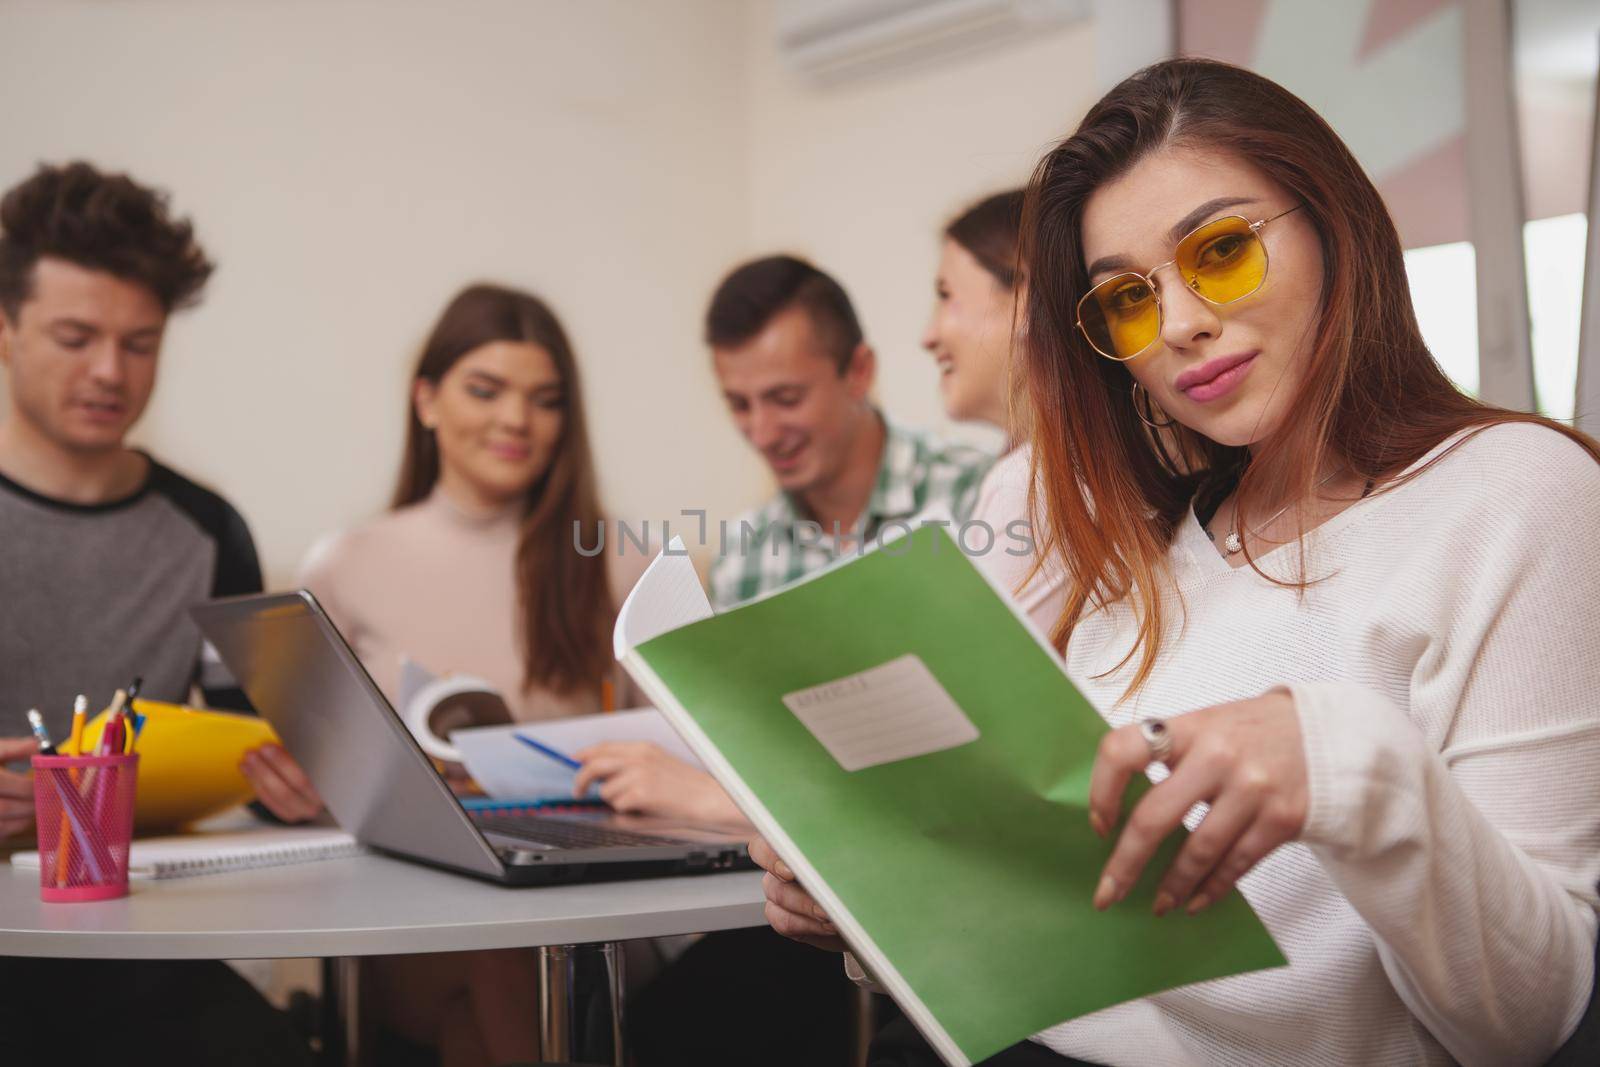 Confidence, success concept. Attractive young female college studentsmiling to the camera, while preparing for exams with her classmates, copy space